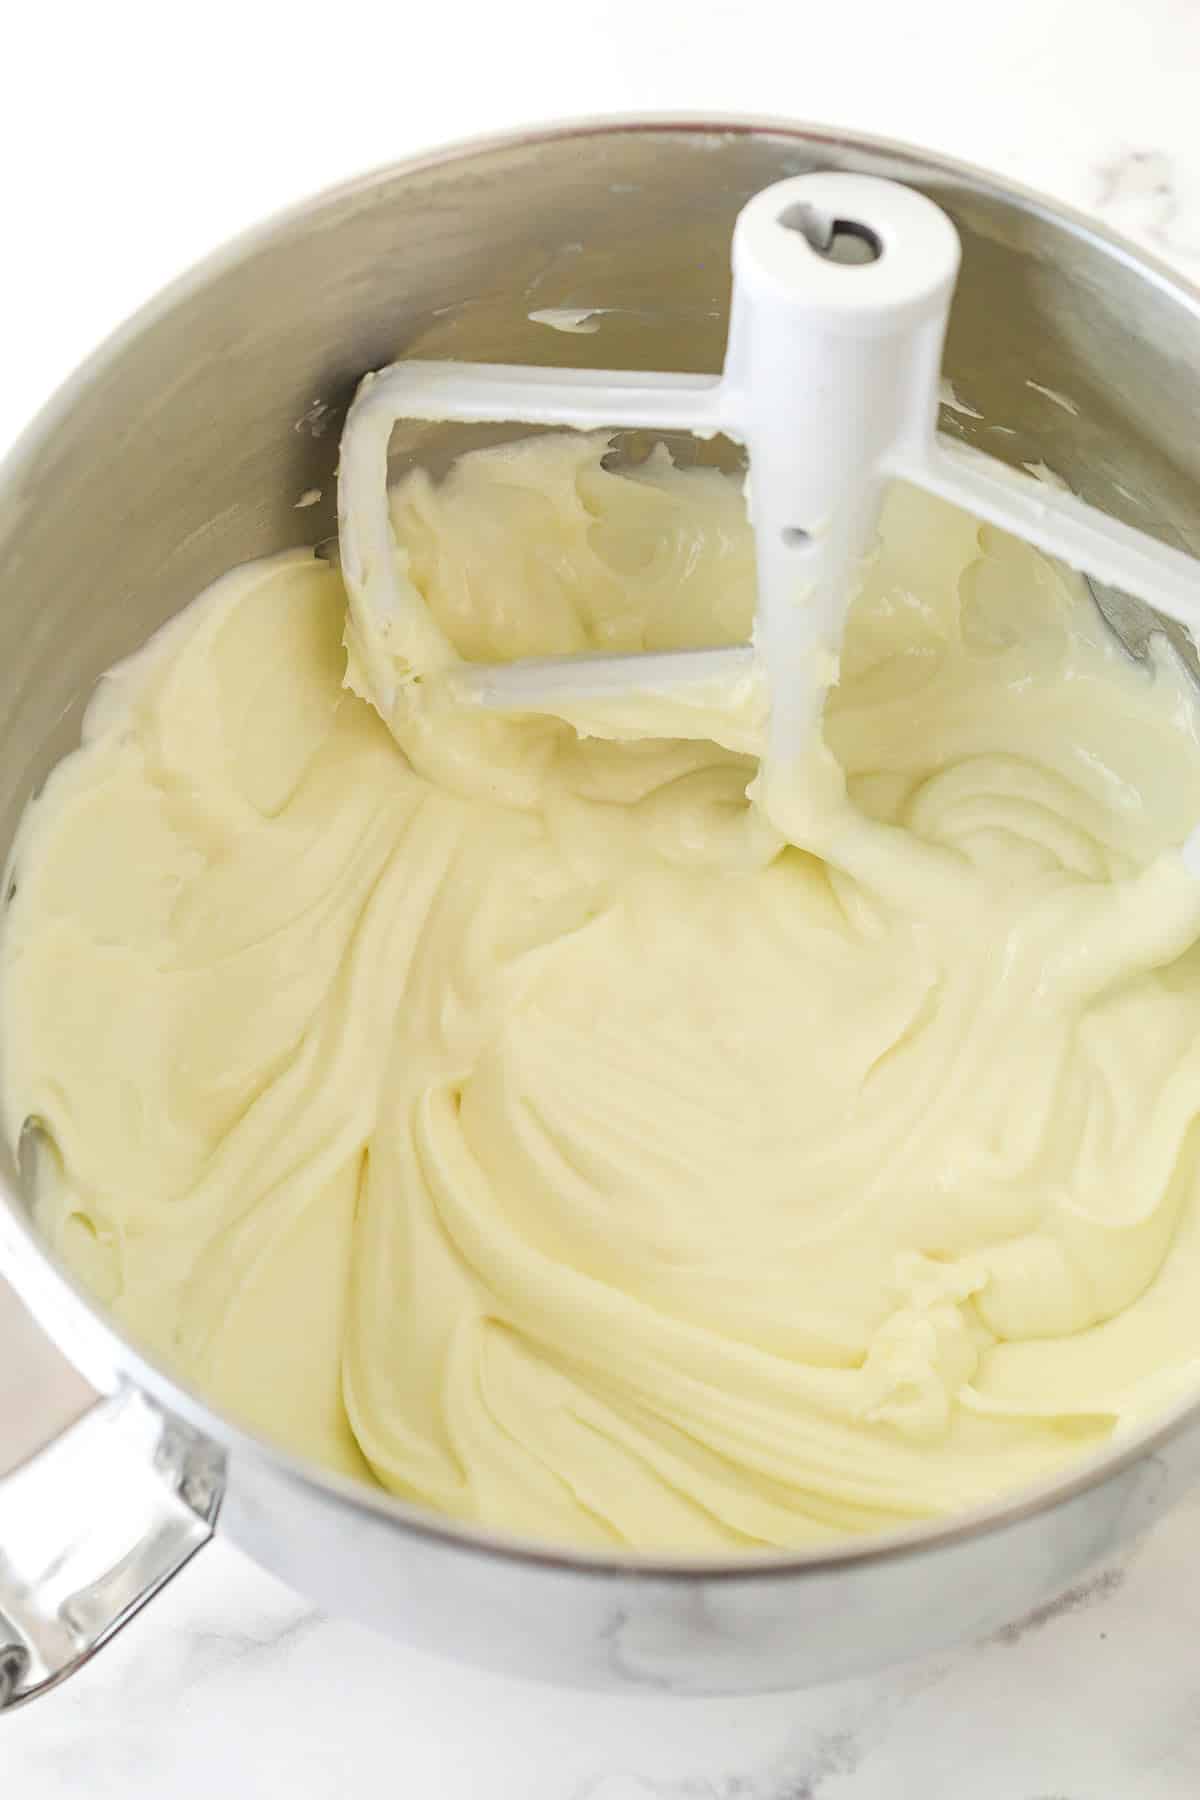 Mixing sour cream into cream cheese filling.